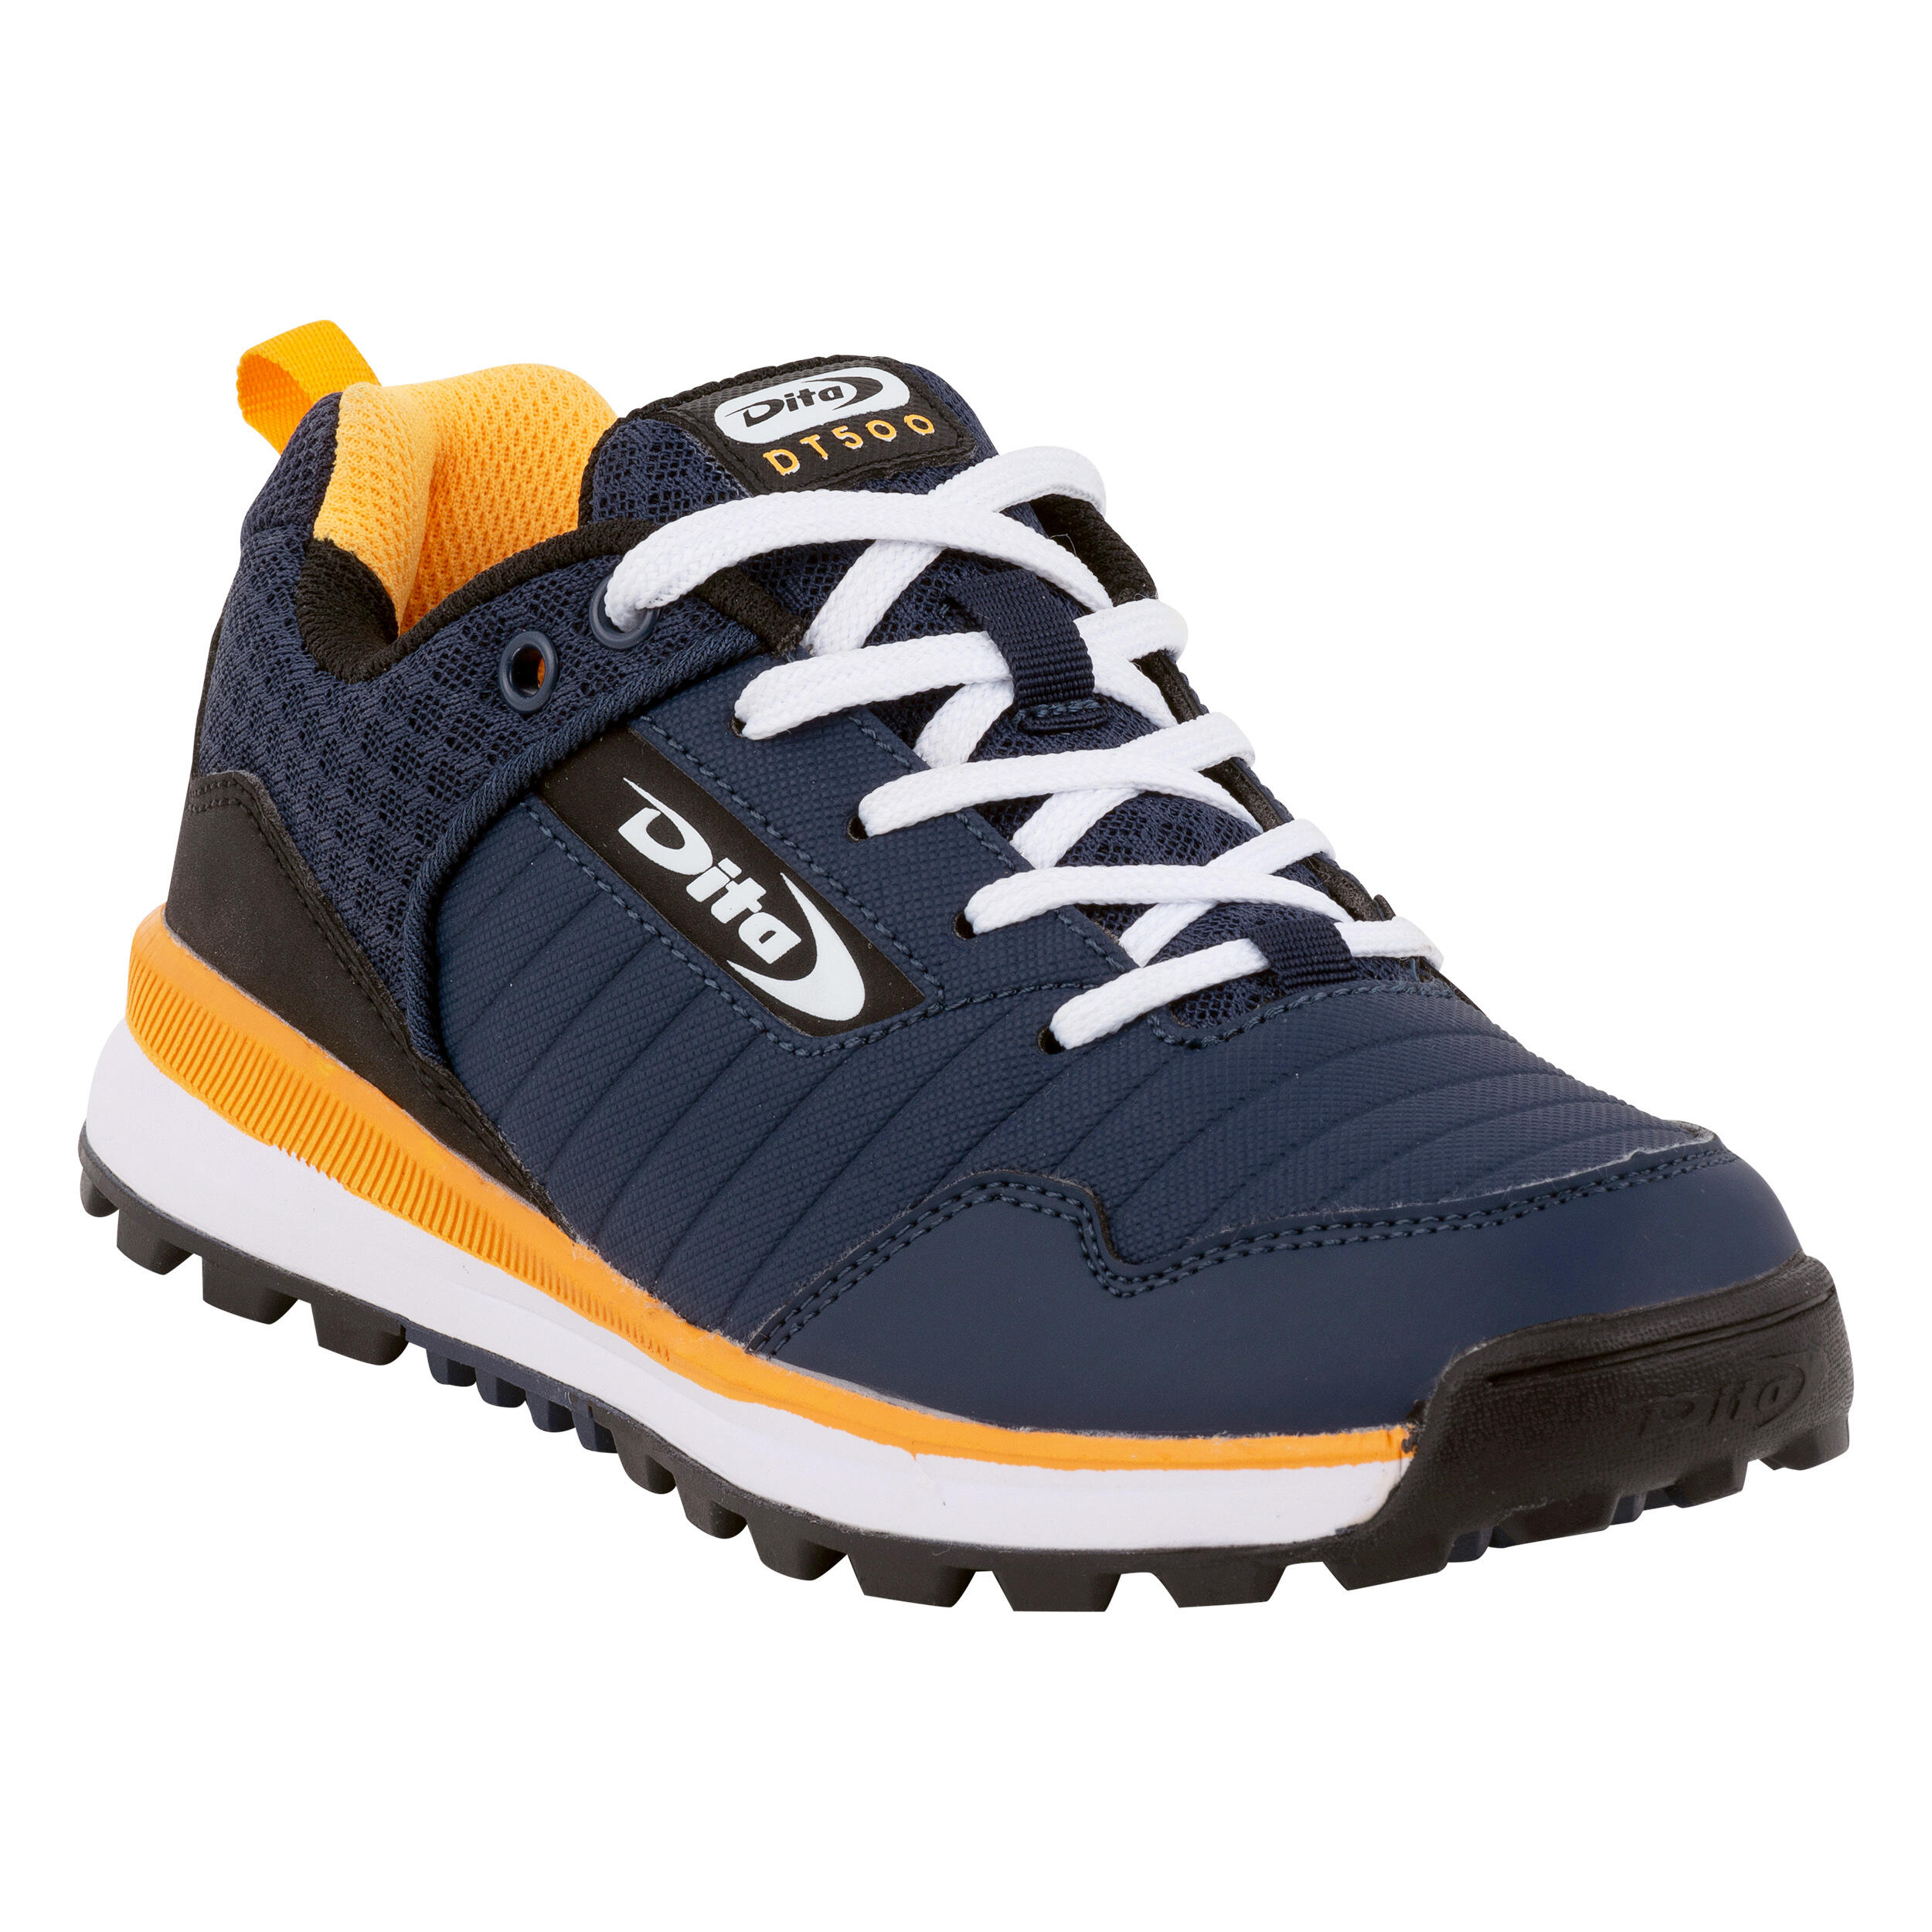 Teens' Moderate-Intensity Hockey Shoes DT500 - Blue/Yellow 7/7